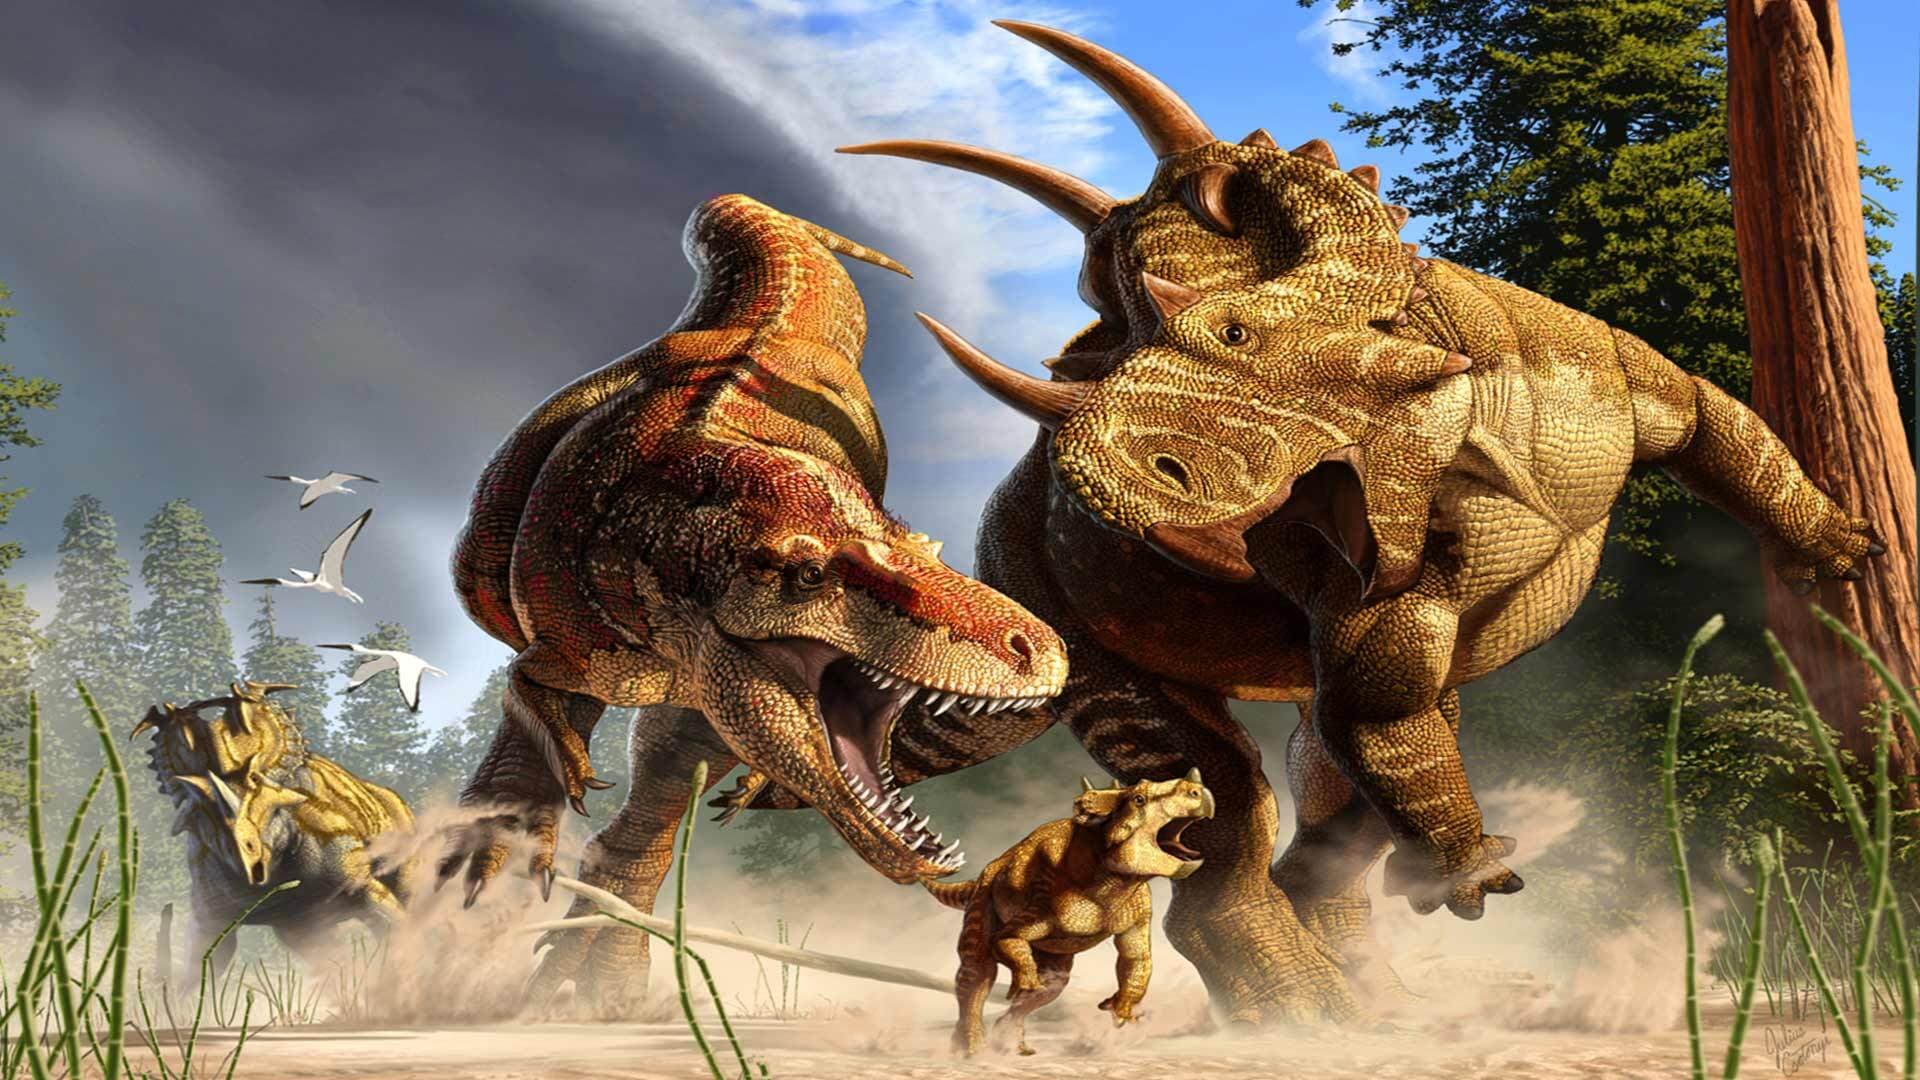 A tyrannosaur Daspletosaurus hunts a young horned Spinops, while an adult Spinops tries to intervene in an illustration set 77 million years ago.